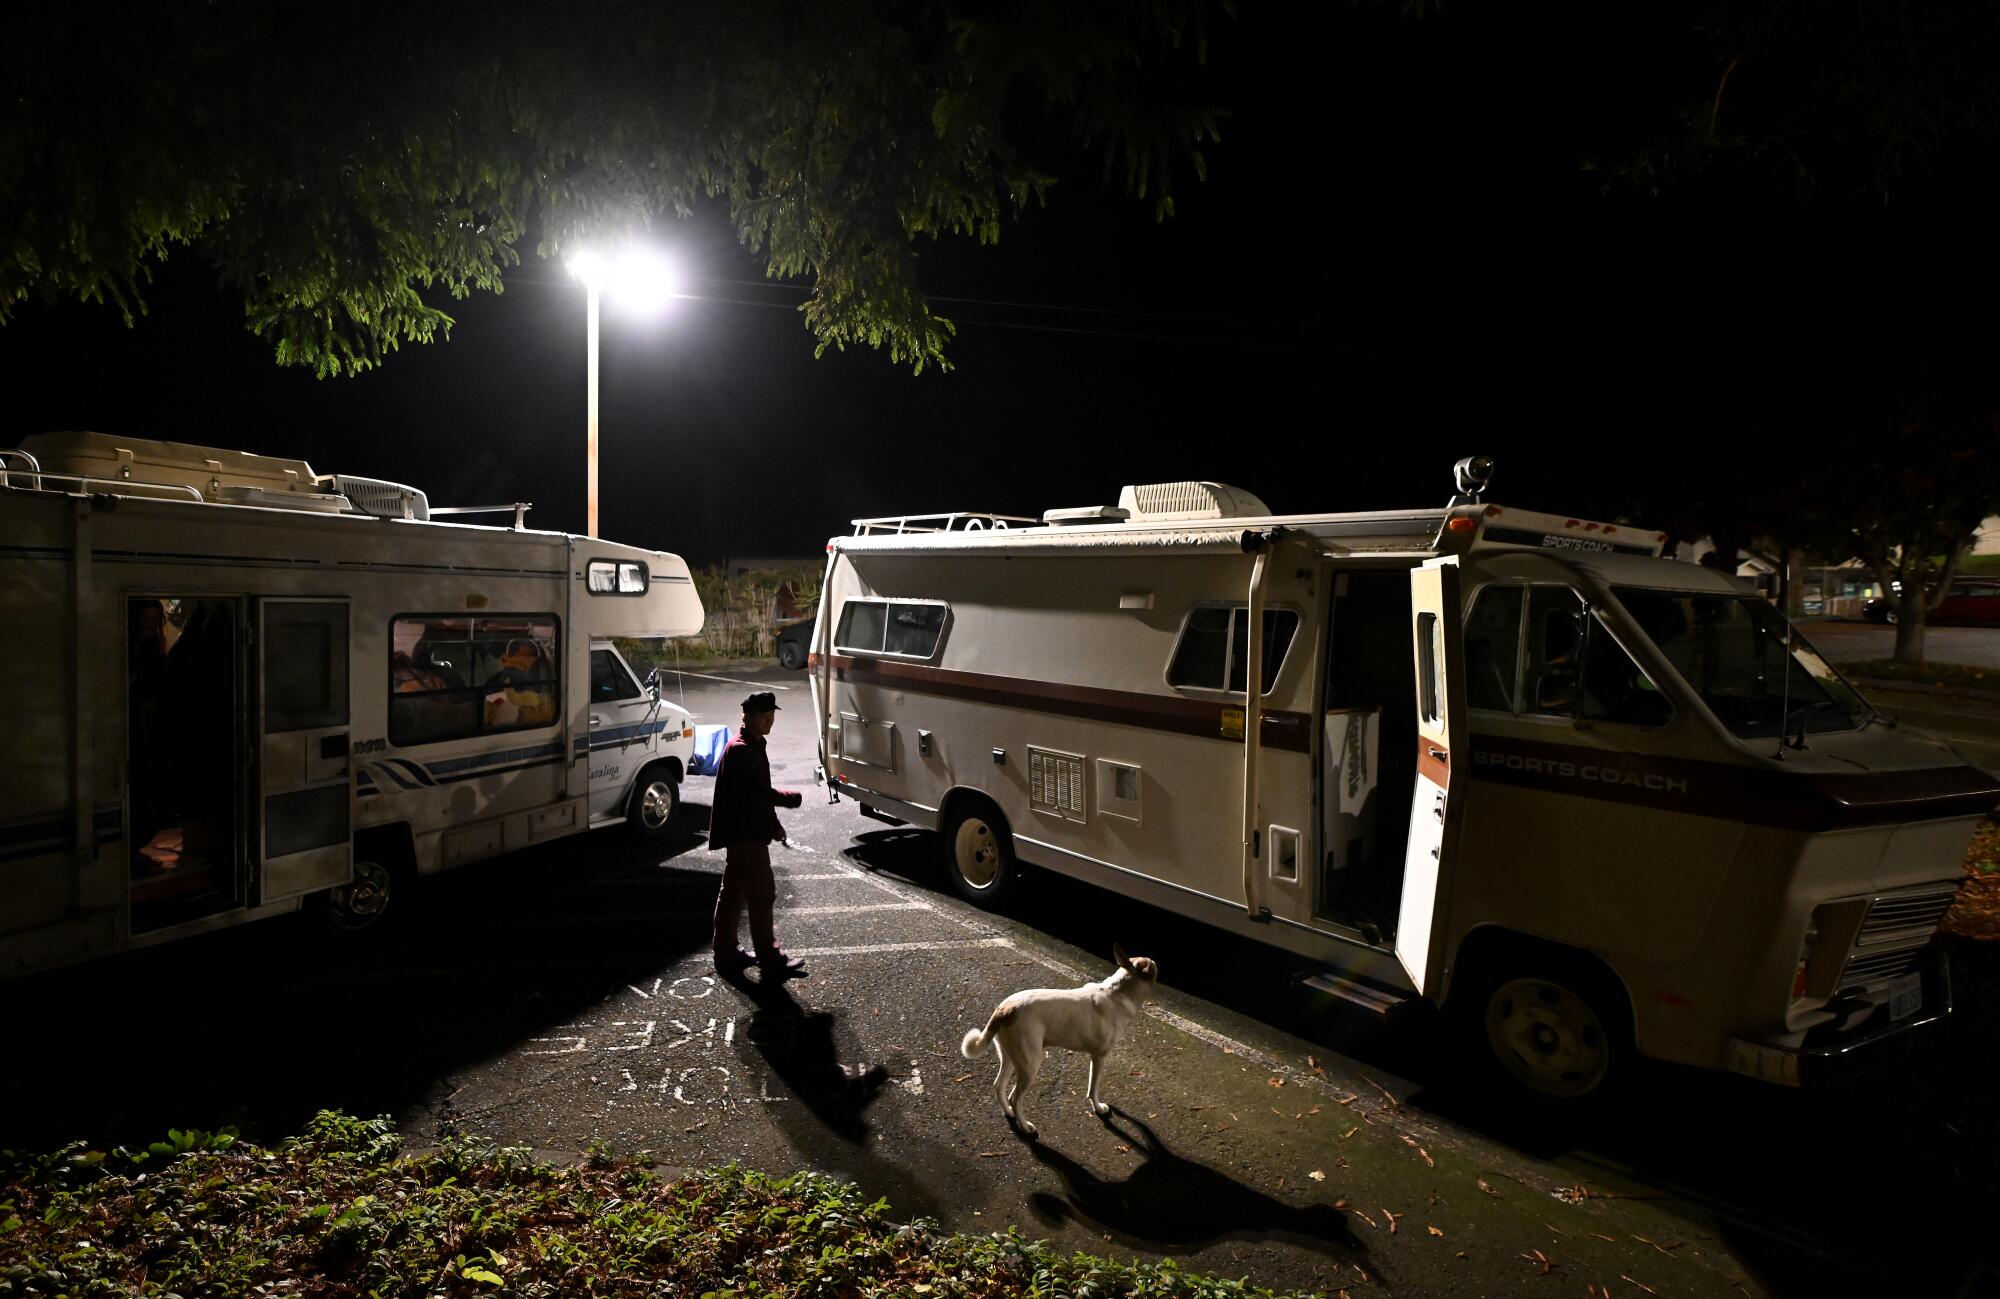 A person and a dog stand between two RVs at night.